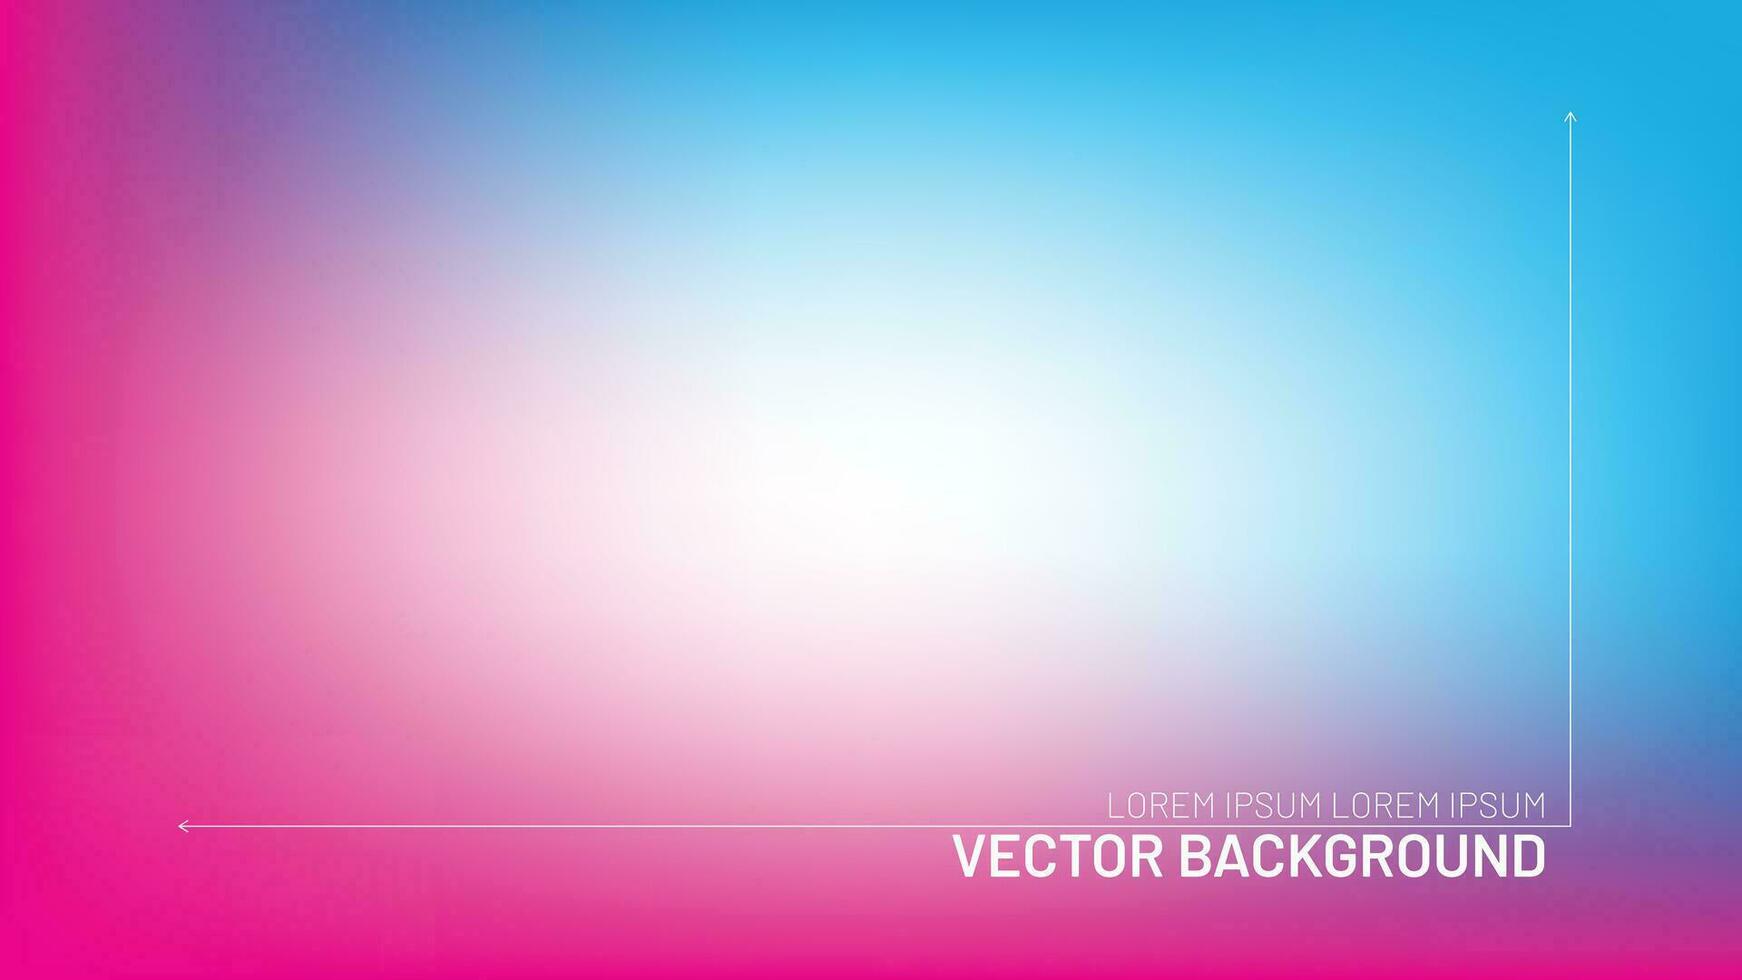 Blurred social media background. Abstract pink, blue gradient design vector